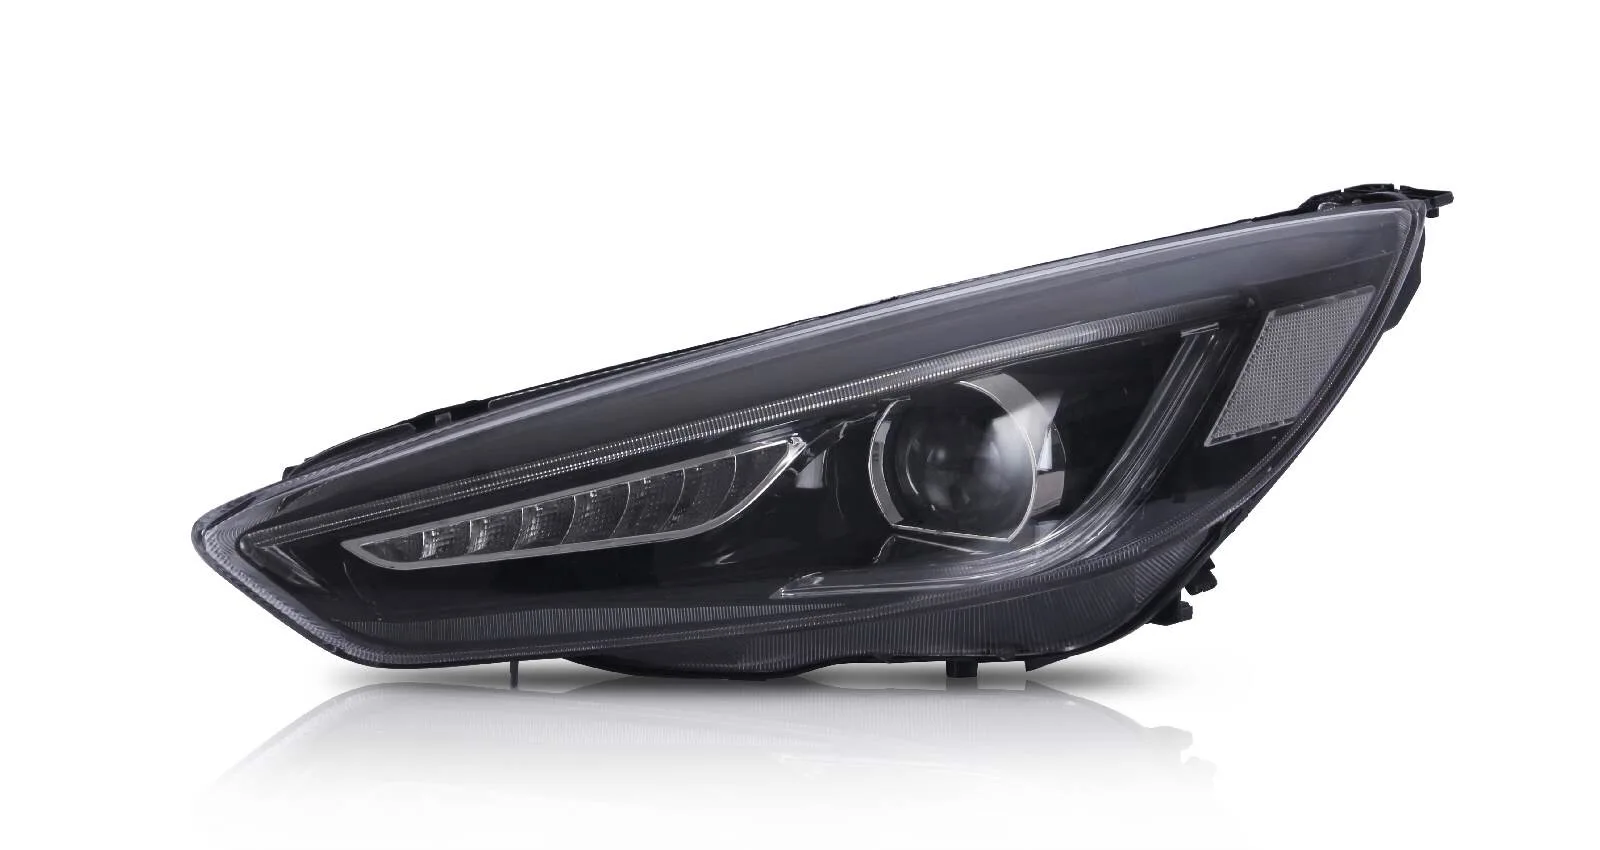 VLAND manufacturer for car headlight for Focus 2015 2016 2017 LED head light with moving signal with demon eye plug and play